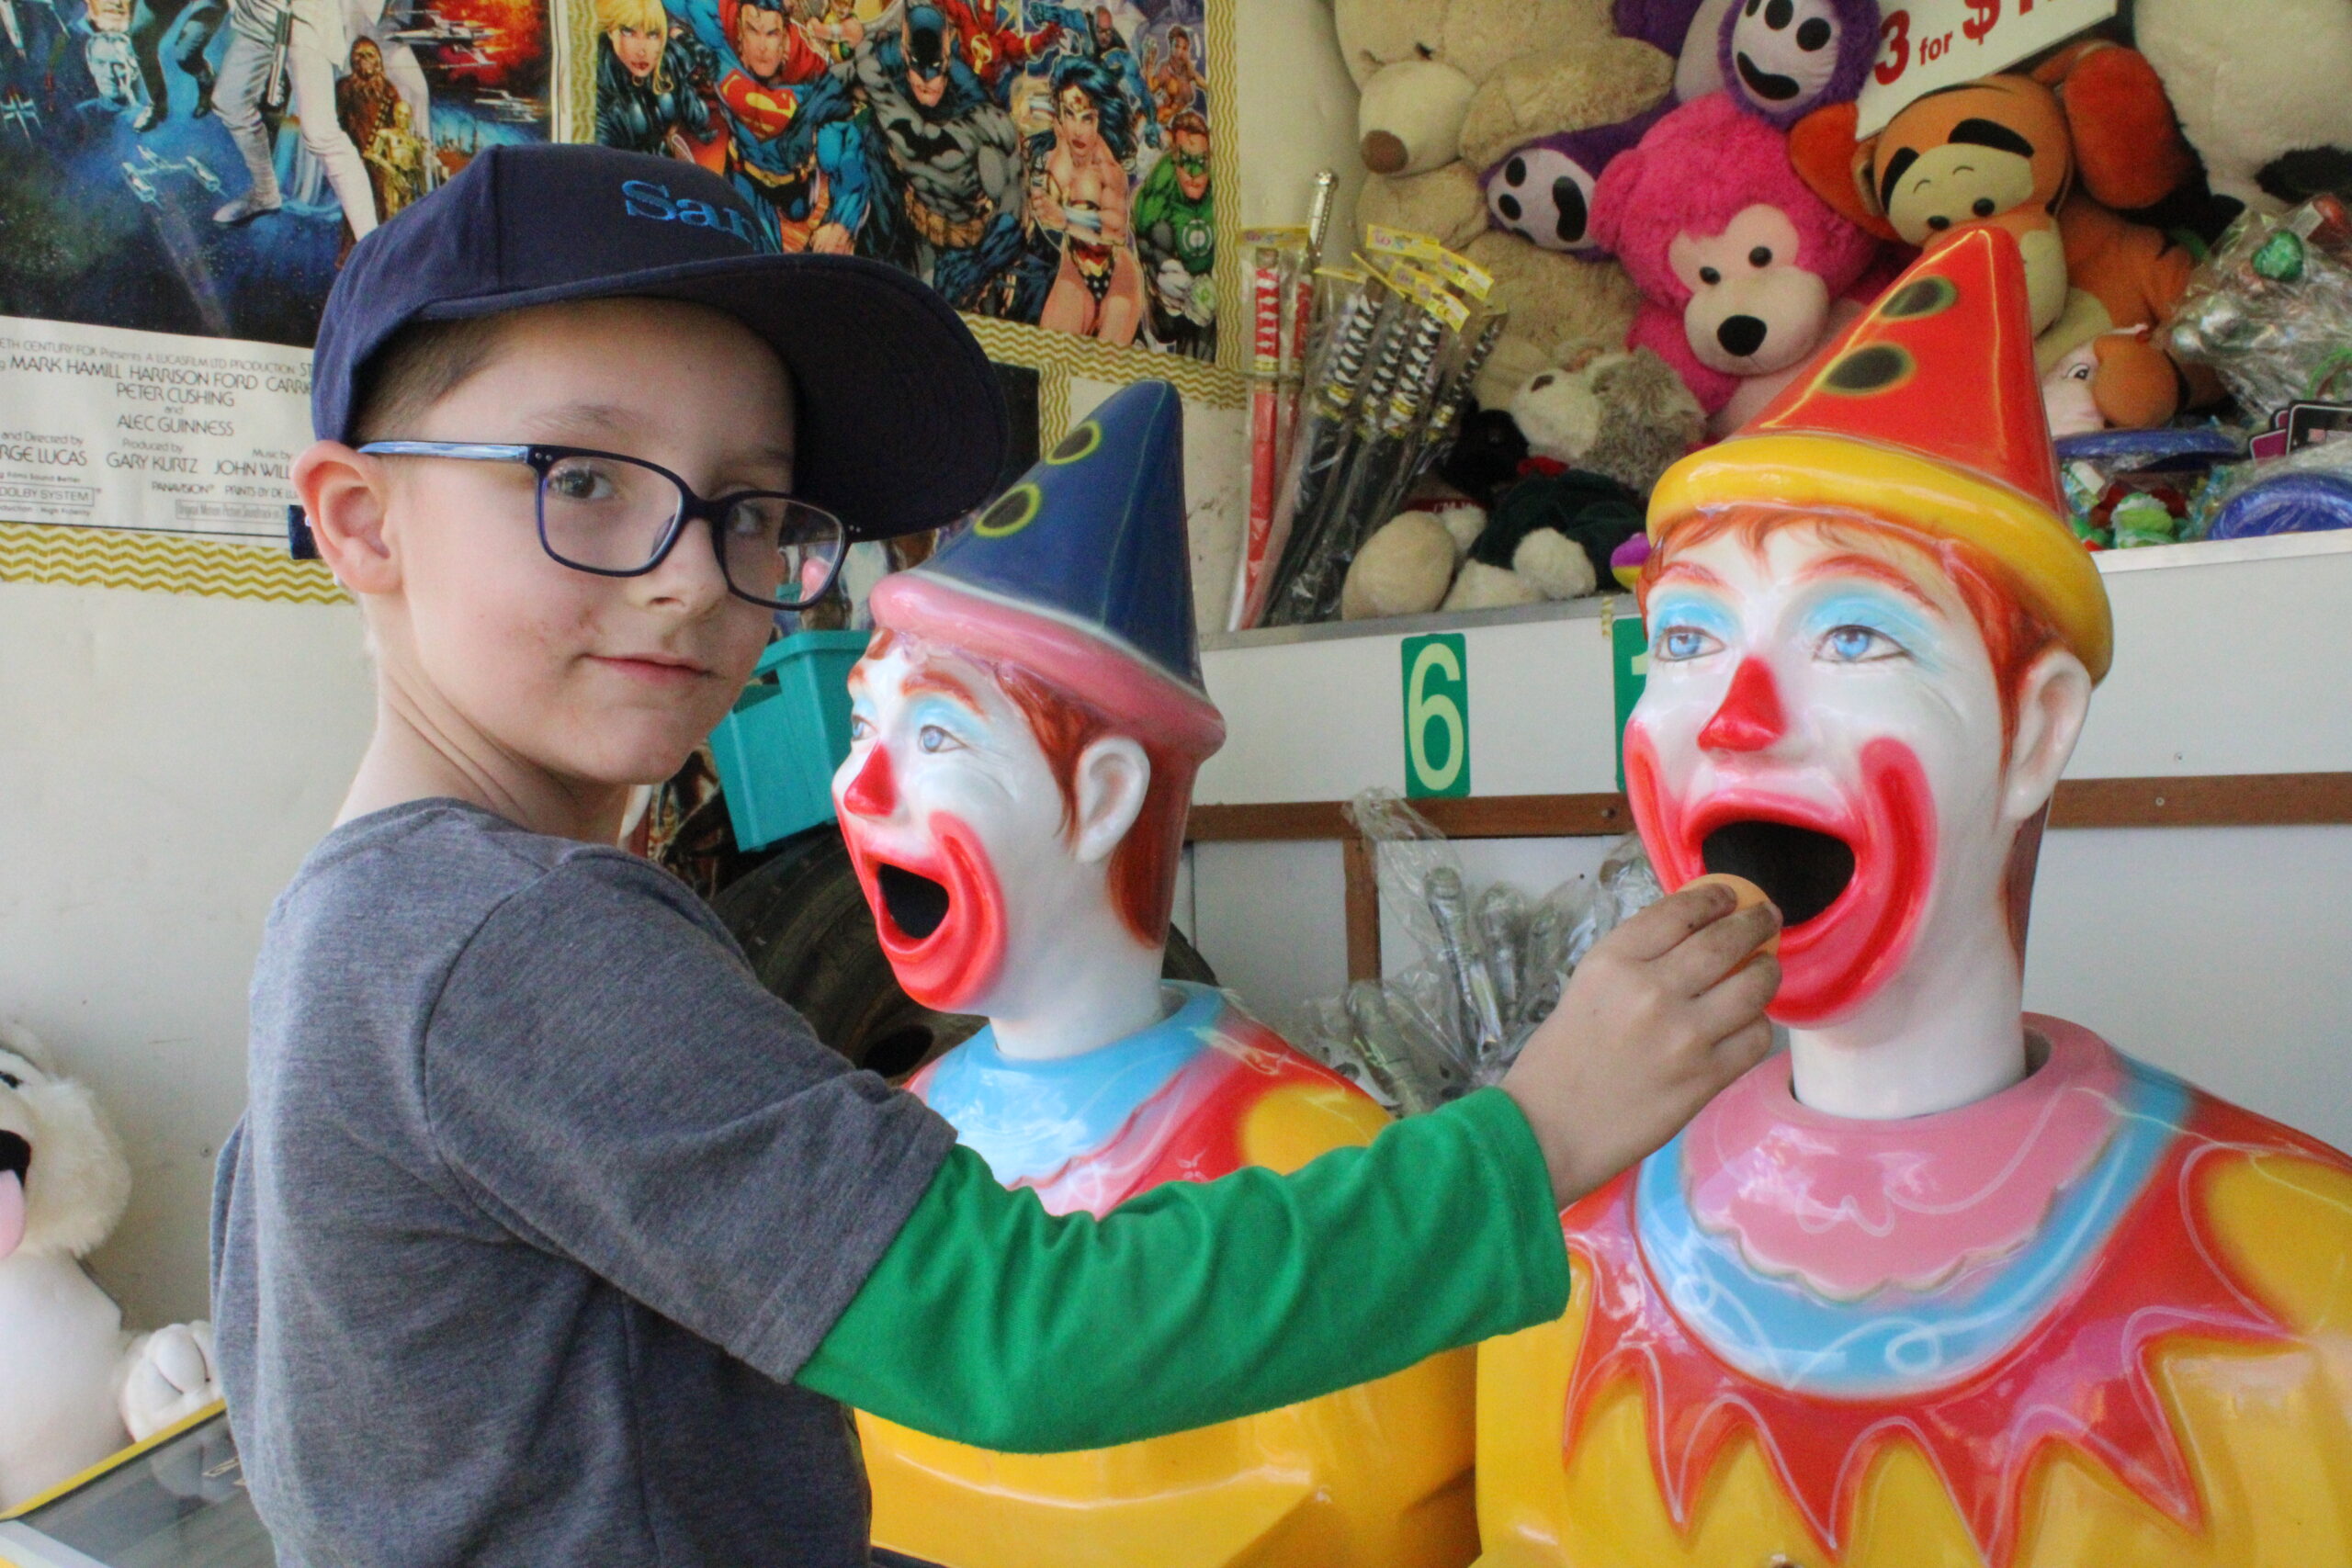 Thorin Stockwell had fun at the clown amusement in sideshow alley.